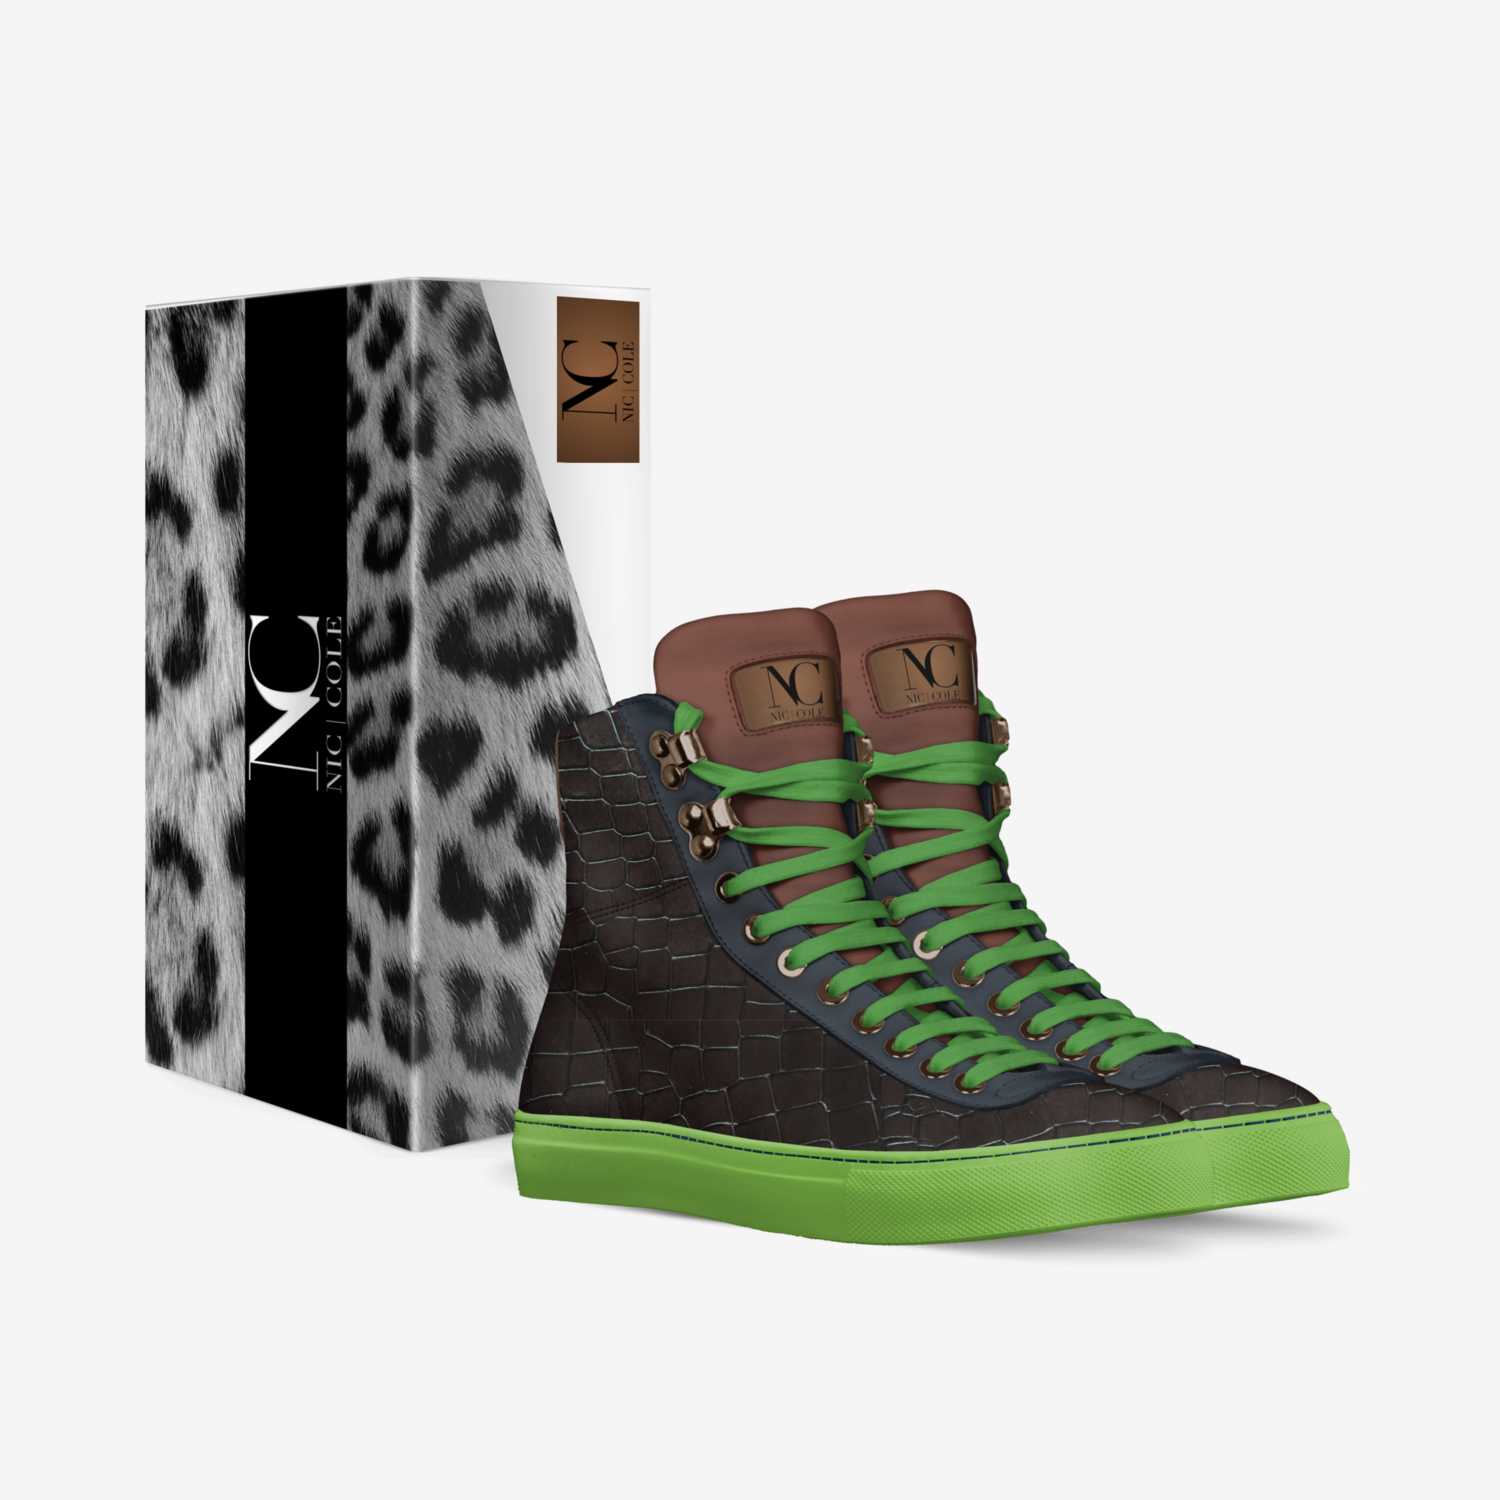 Wild custom made in Italy shoes by Kahmeel Callahan | Box view